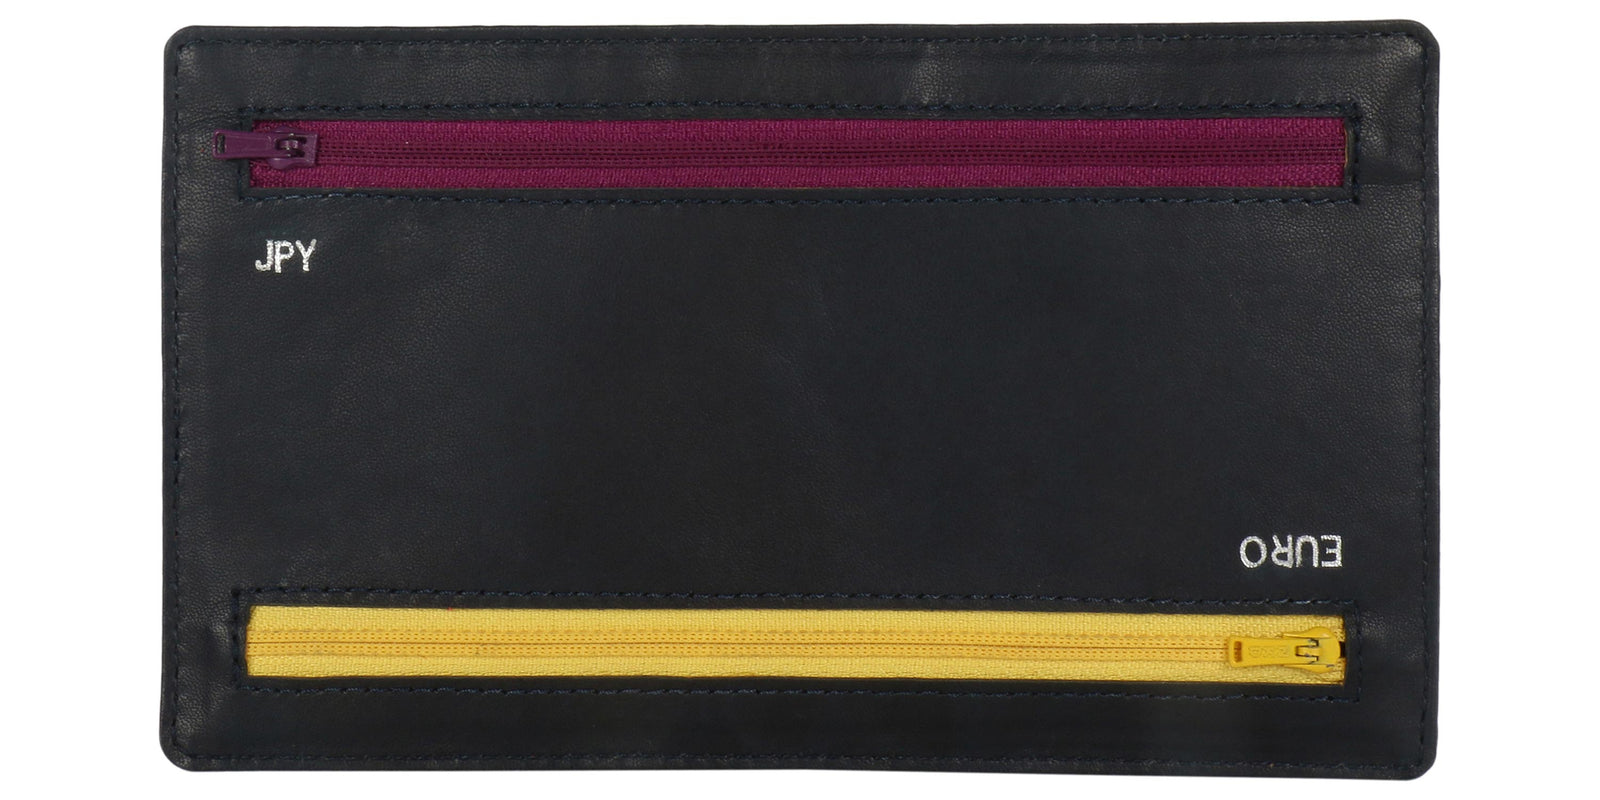 Front view of  4  Zip Multi currency wallet. Two  Zip Red and Yellow in color visible. Red Zip is meant for JPY currency It  is positioned on top of wallet. Yellow zip is meant for Euro currency and positioned at bottom.